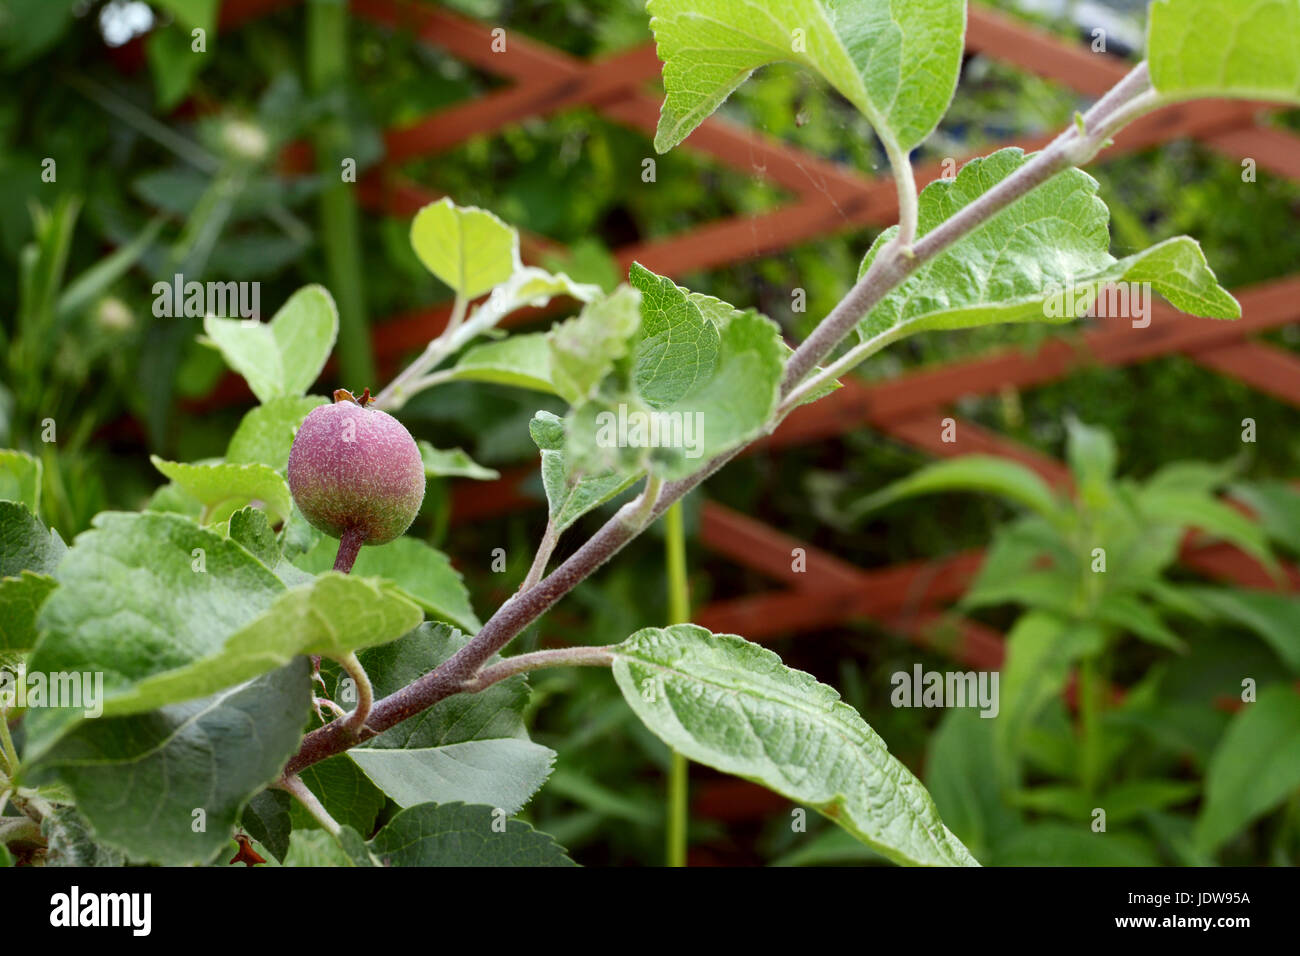 A young fruit develops on the branch of a Braeburn apple tree in an allotment Stock Photo